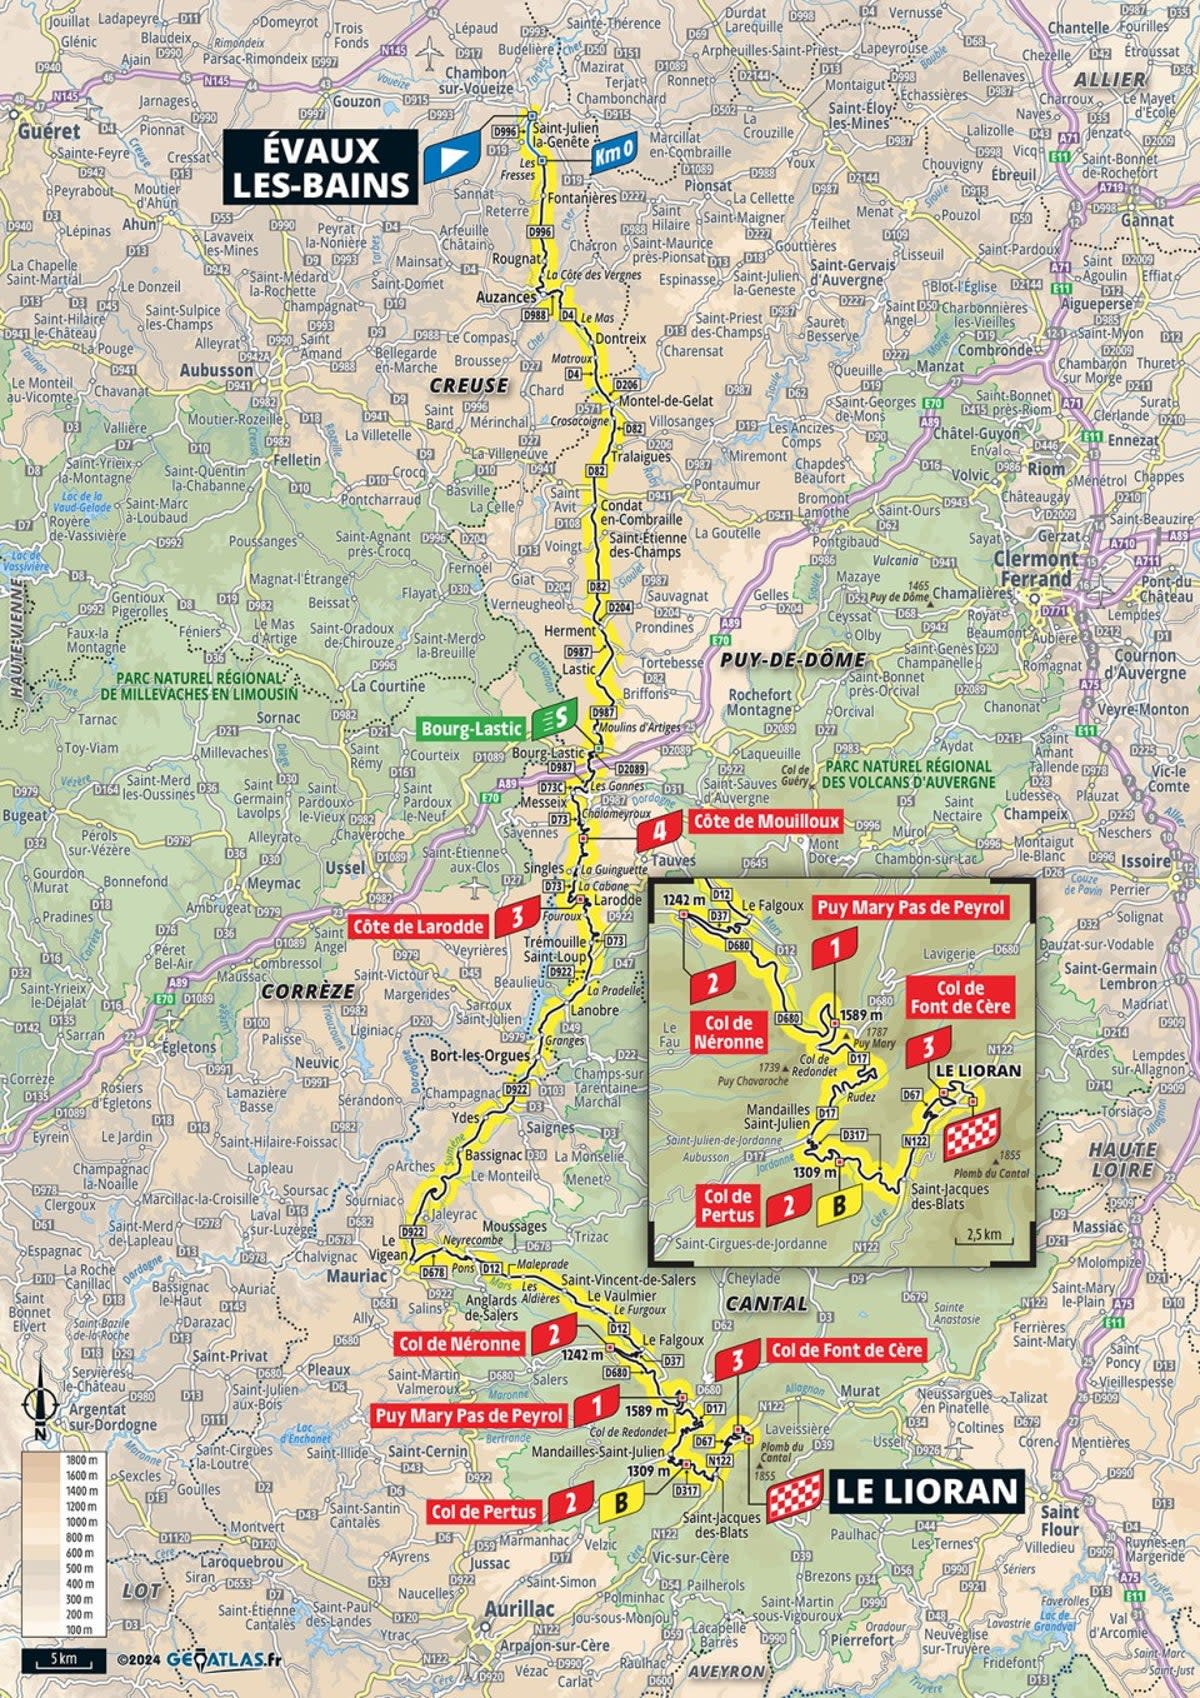 Stage 11 is from Evaux-les-Bains to Le Lioran  (Letour)